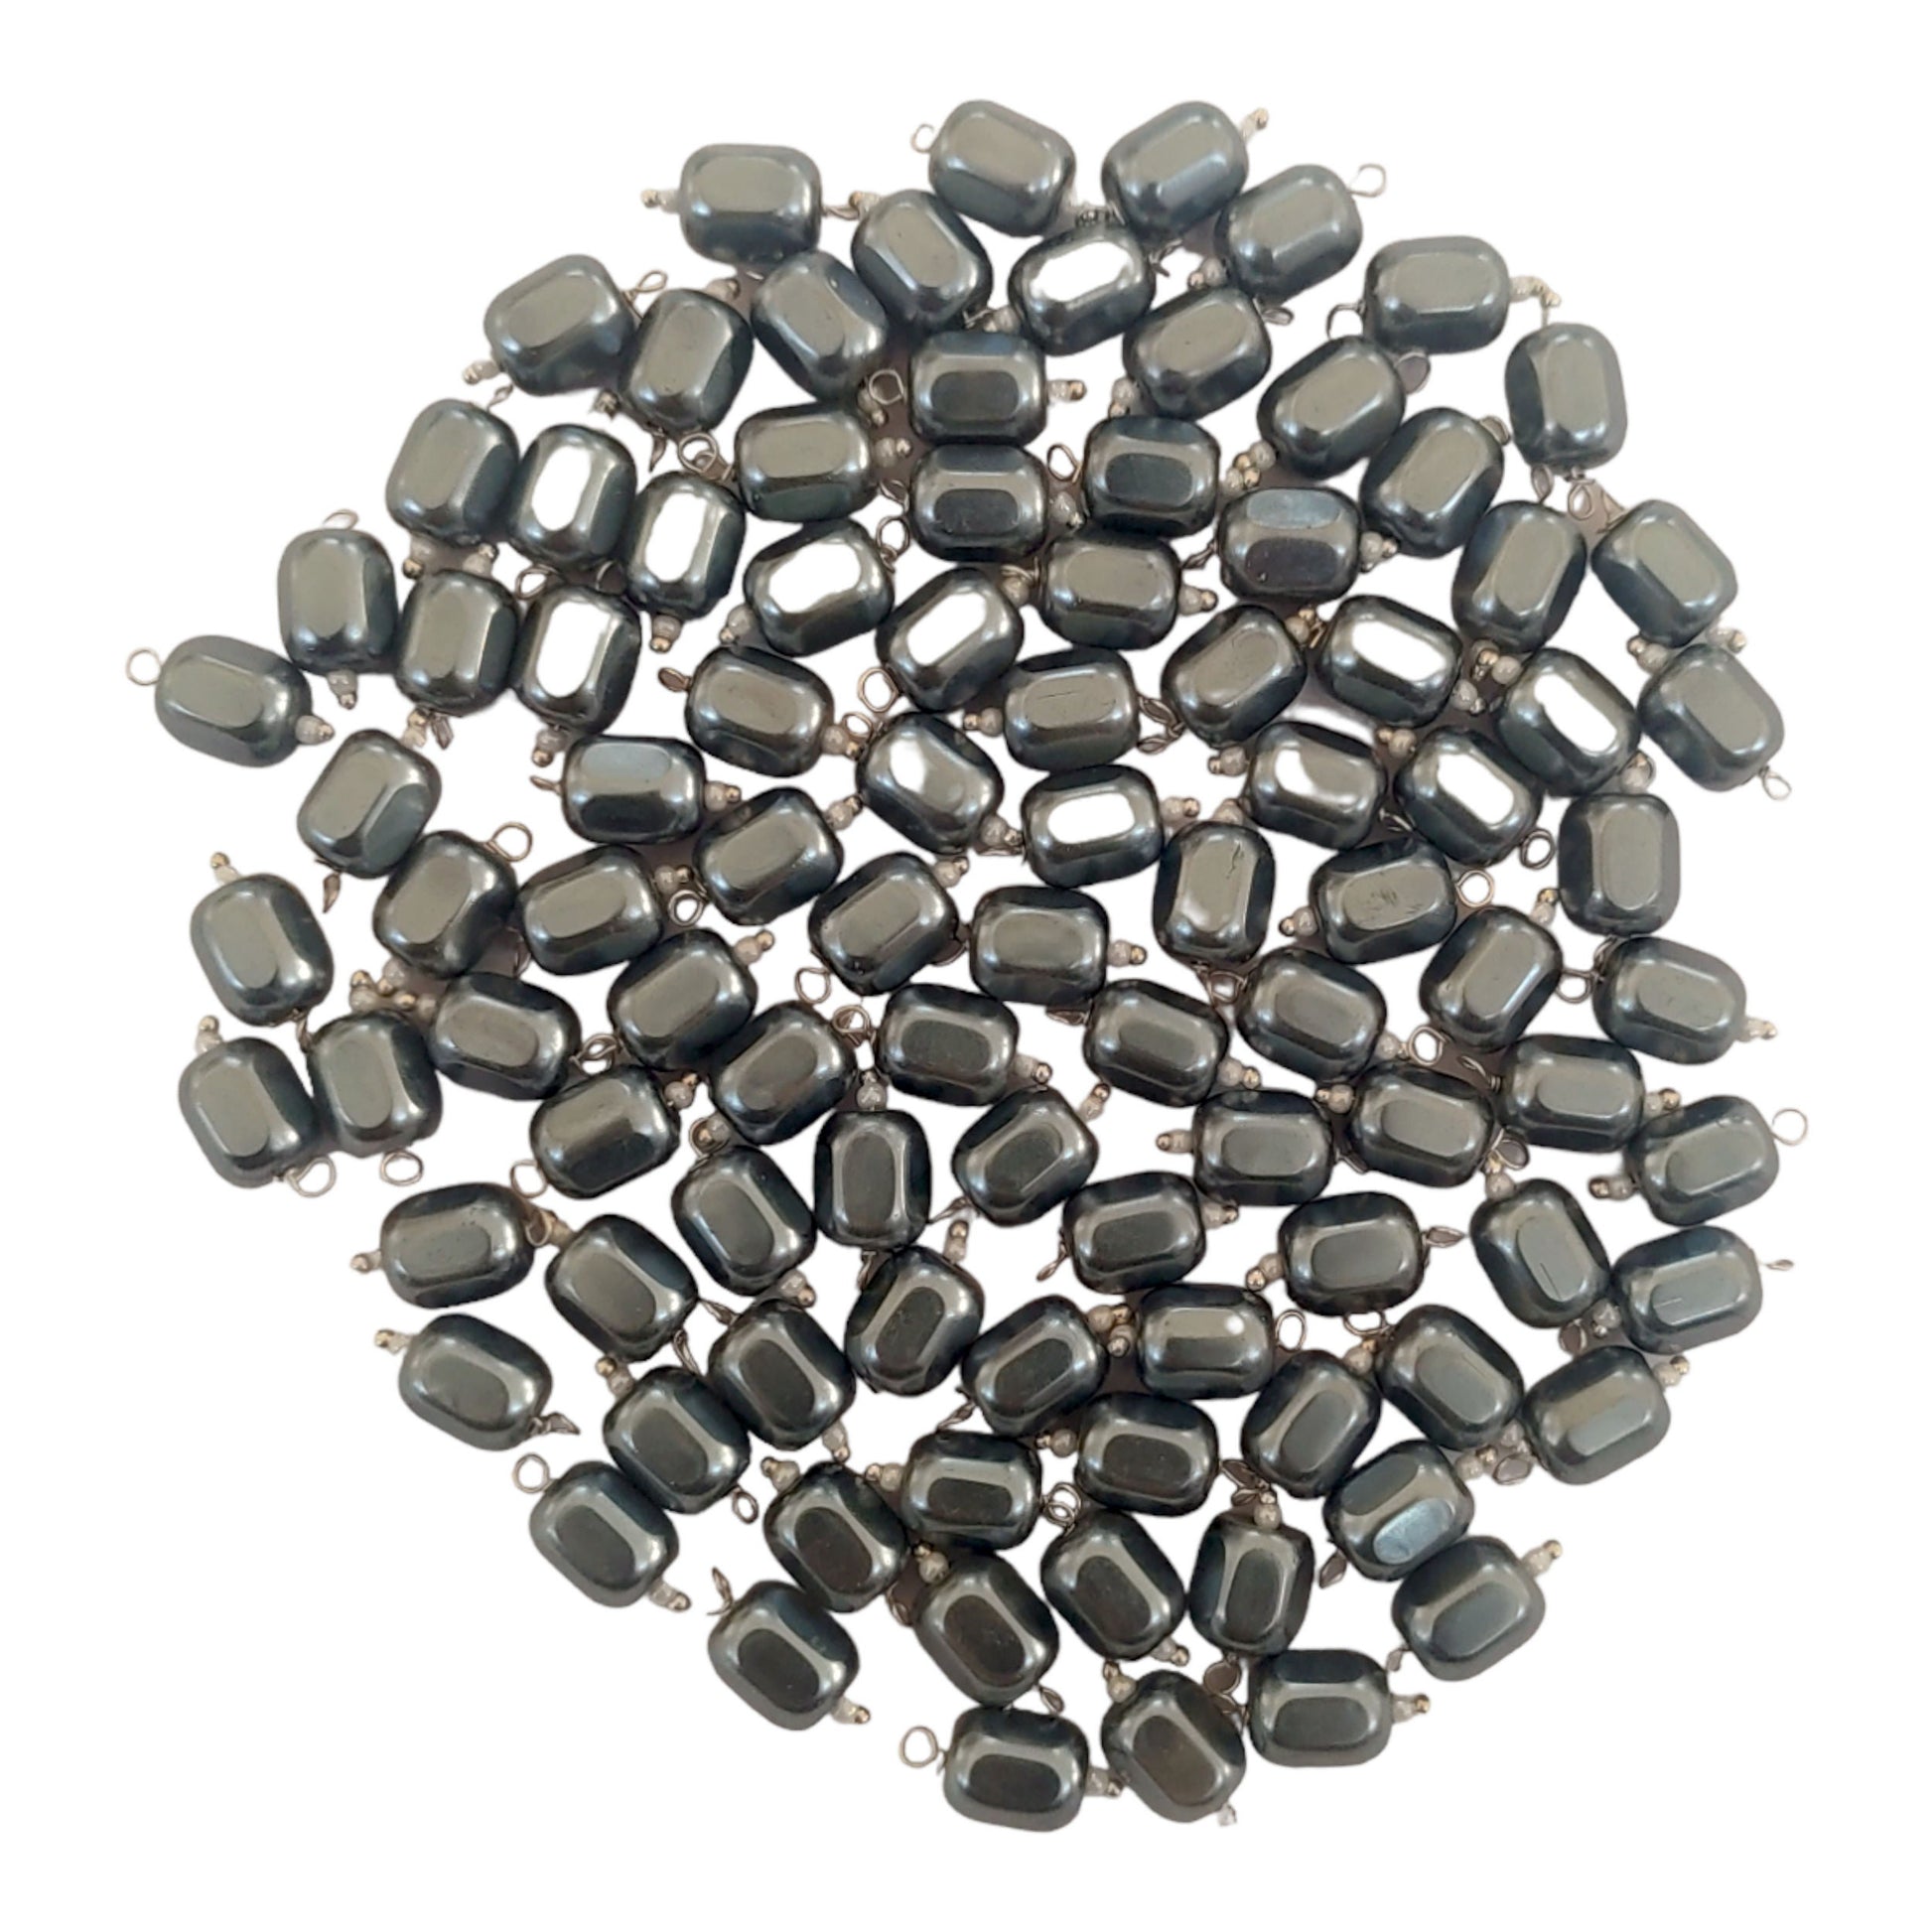 Indian Petals Chinese Tumble Metal Beads for Craft, Decorationor or Jewelry Making, 100Pcs -11757